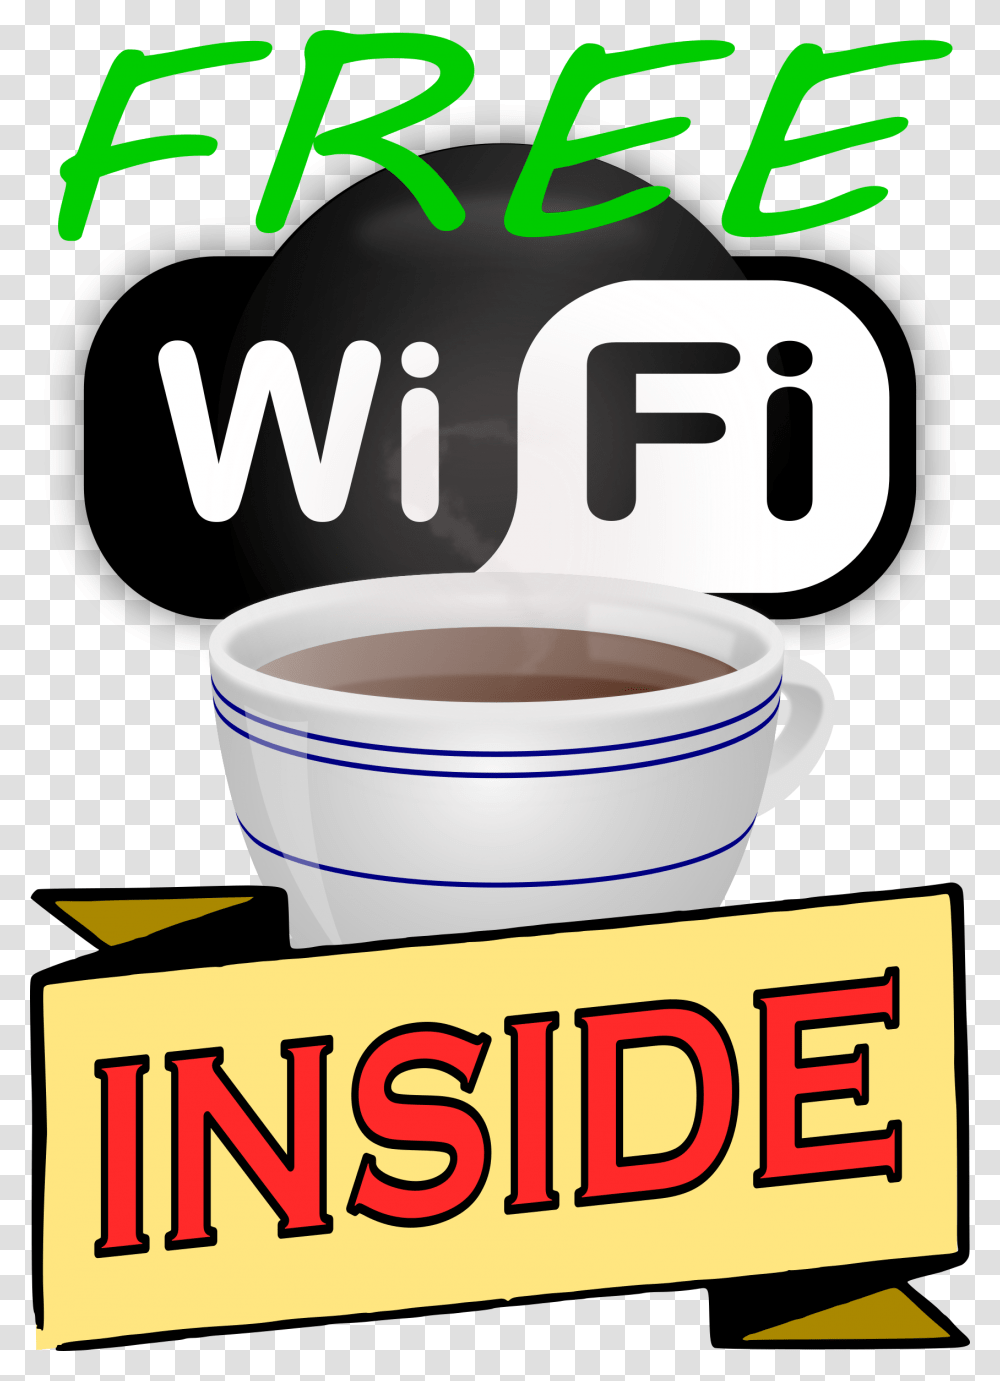 Free Wifi Inside Clip Arts Gambar Meme Free Wifi, Coffee Cup, Beverage, Drink, Bowl Transparent Png